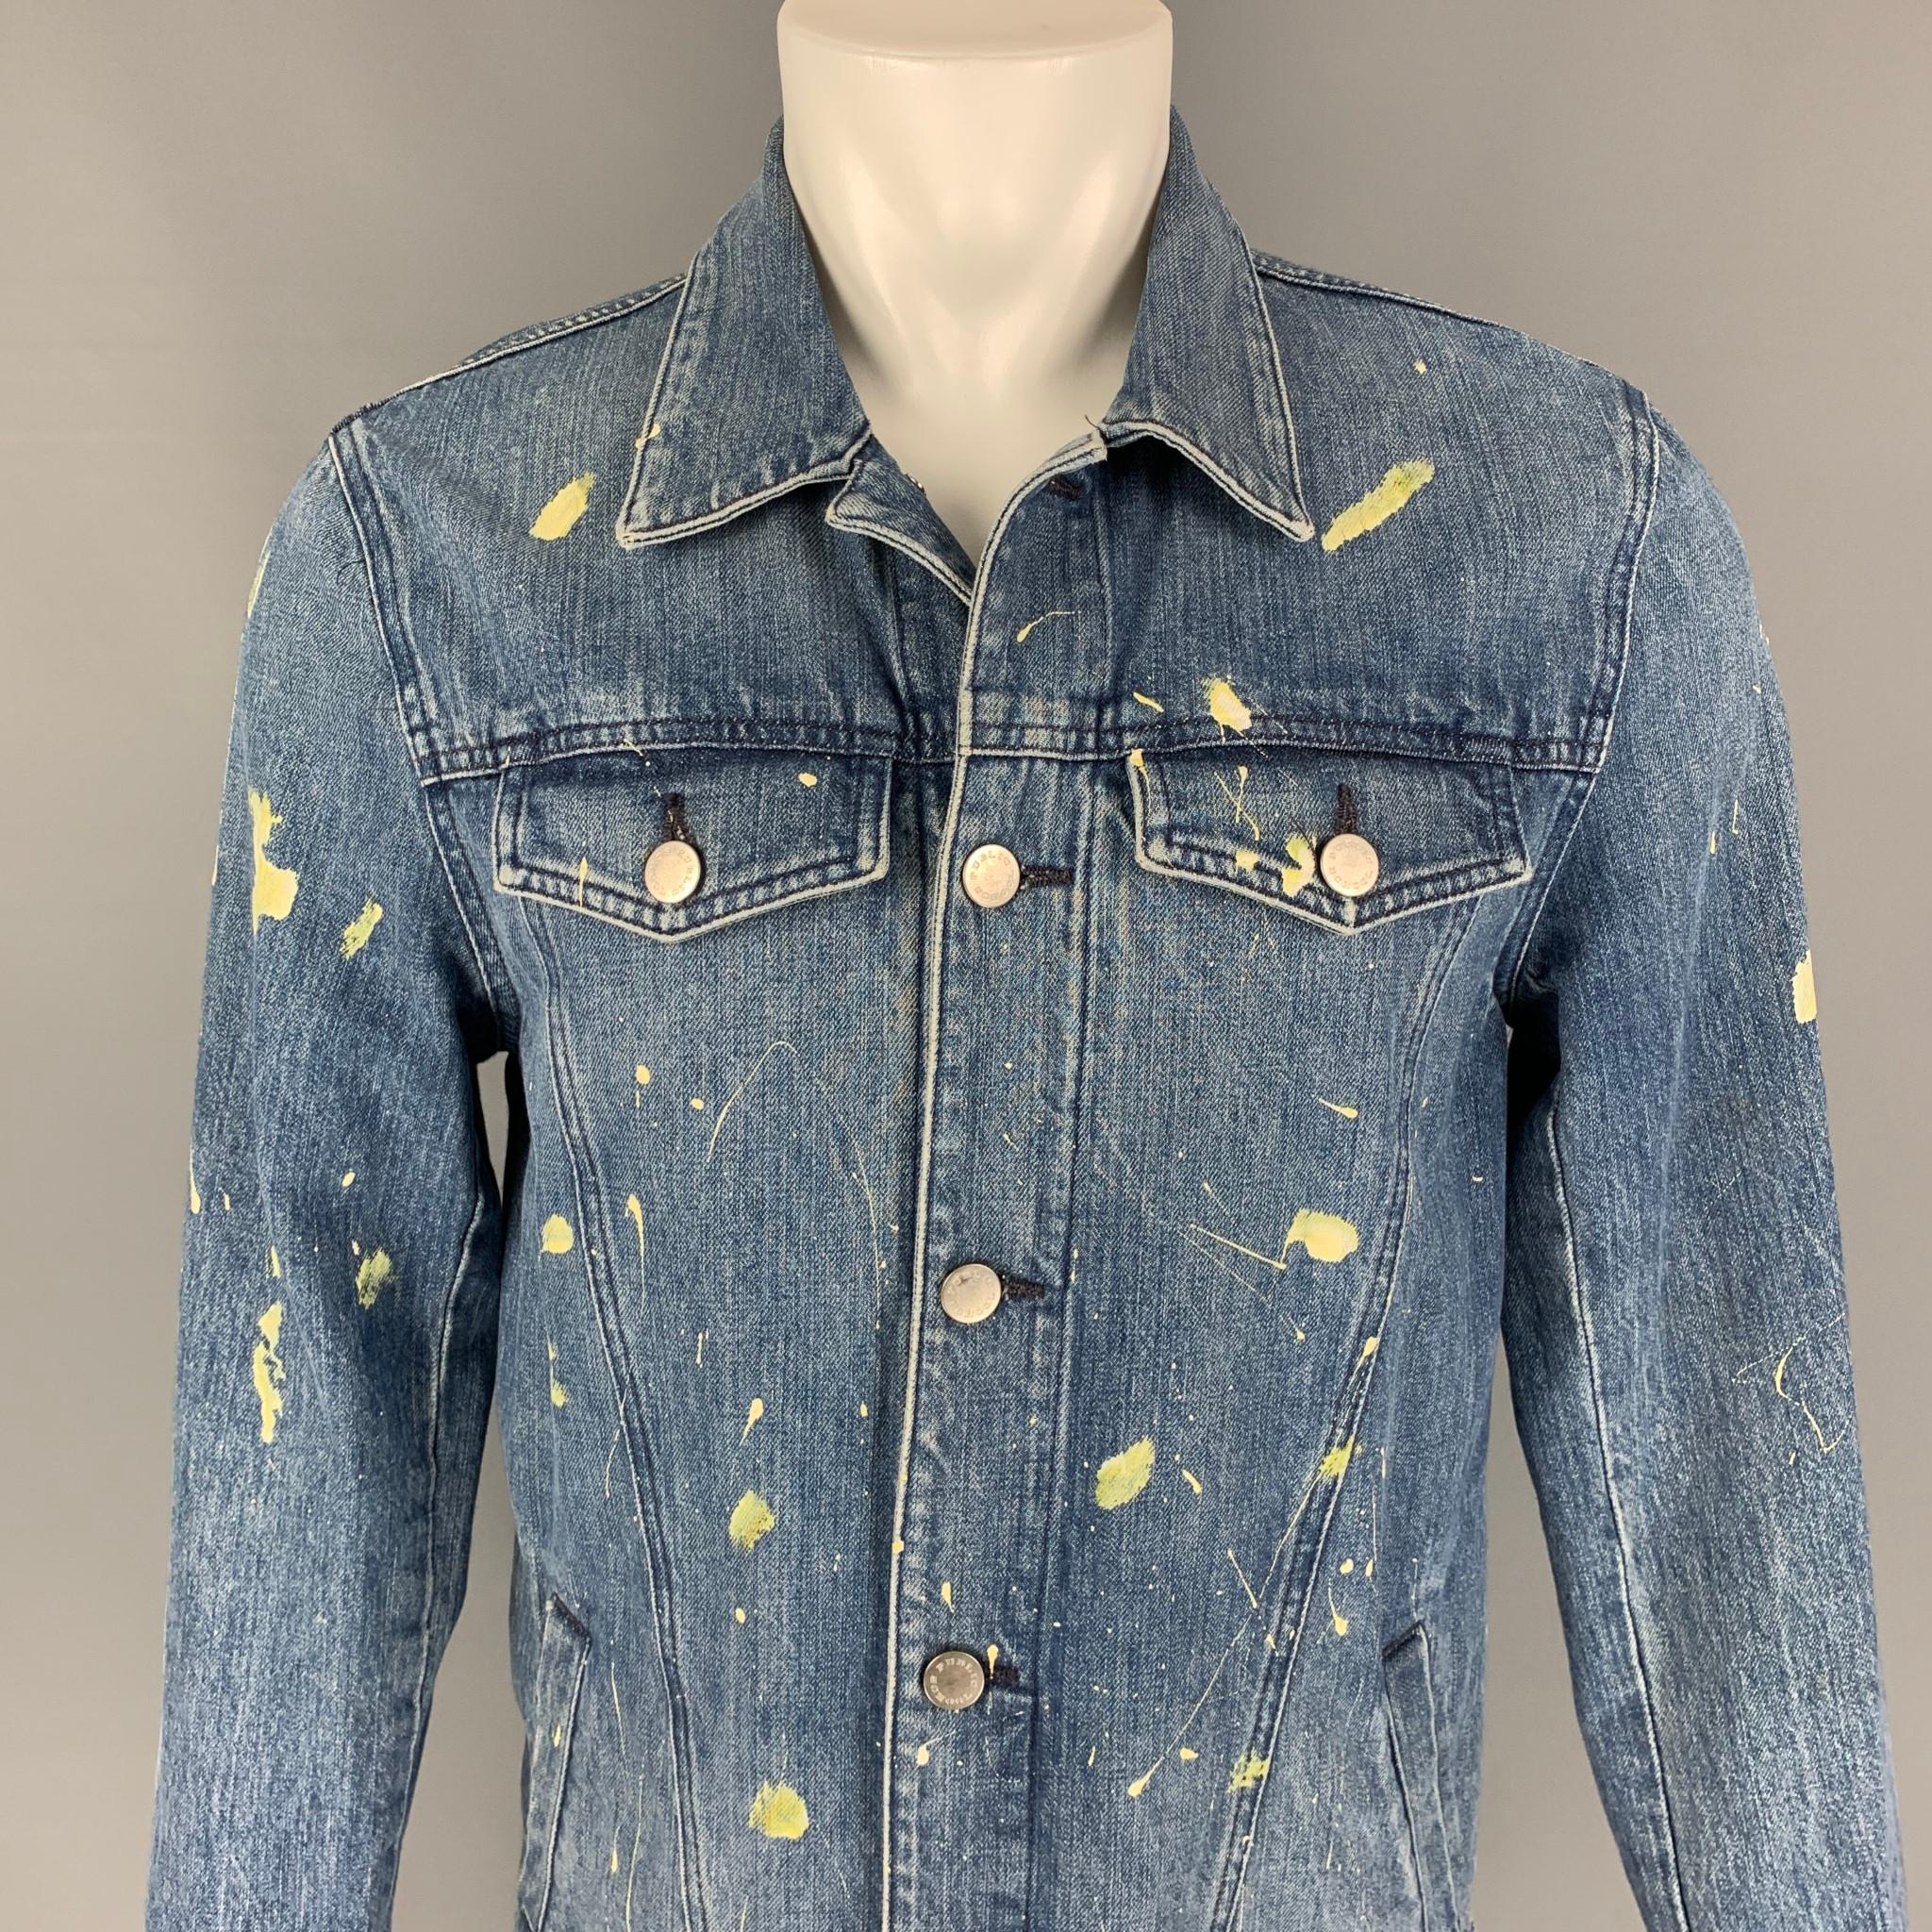 PUBLIC SCHOOL jacket comes in a blue & yellow cotton with paint splatter details featuring a back 